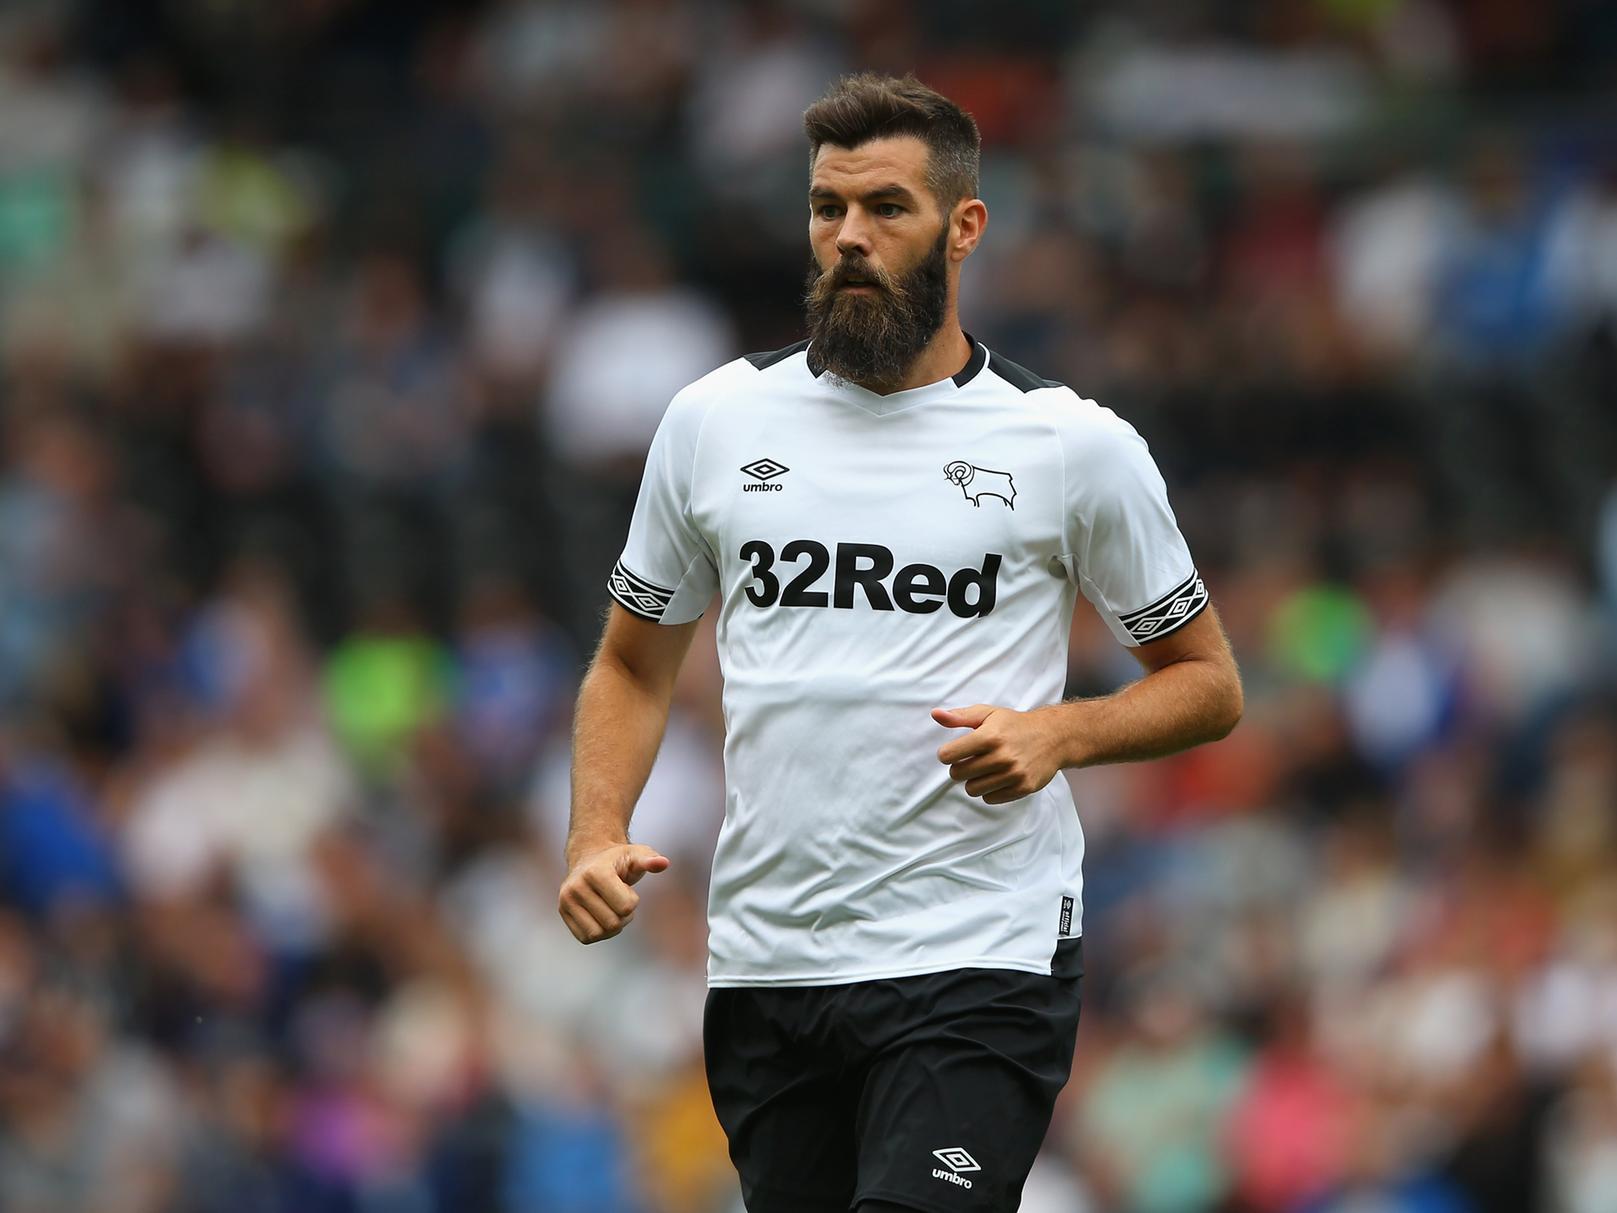 A 77-cap Wales international midfielder, the 32-year-old has Premier League experience with Crystal Palace and played in his countrys 2016 run to the European Championships semi-final.